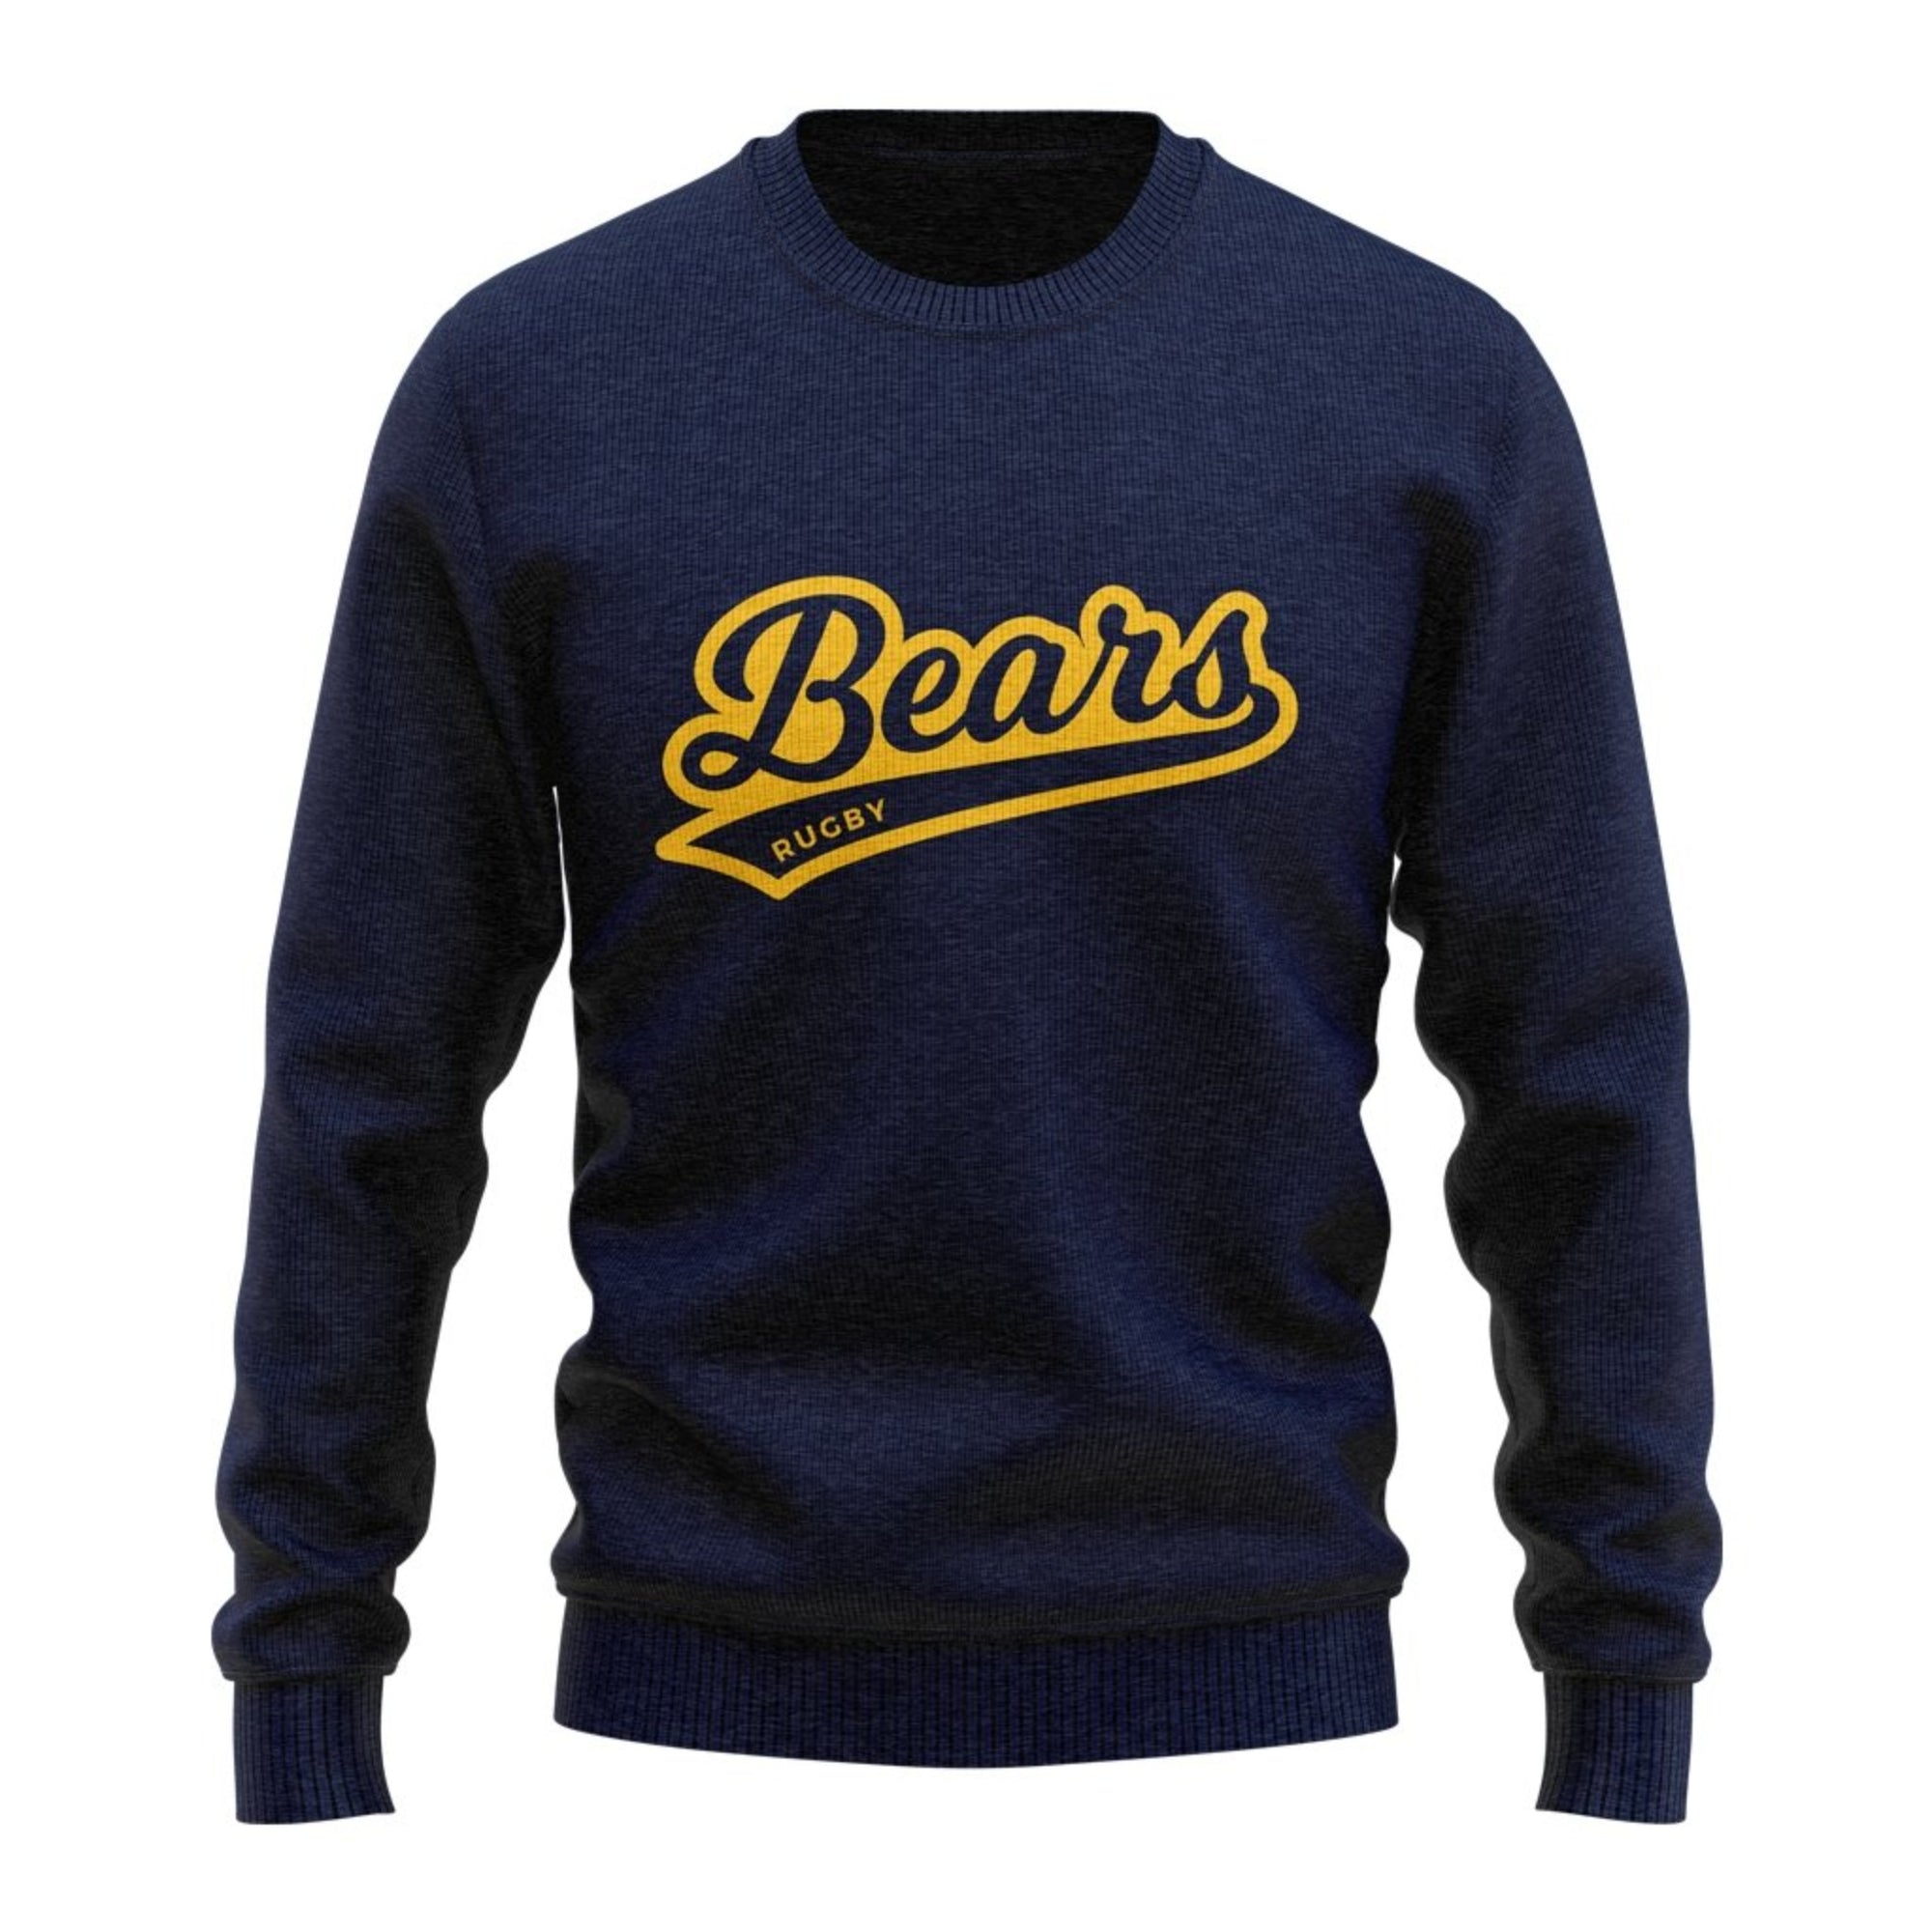 BC Rugby 2021 "Bears" Crew Neck Sweater - Adult Unisex - www.therugbyshop.com www.therugbyshop.com UNISEX / NAVY / S XIX Brands HOODIES BC Rugby 2021 "Bears" Crew Neck Sweater - Adult Unisex